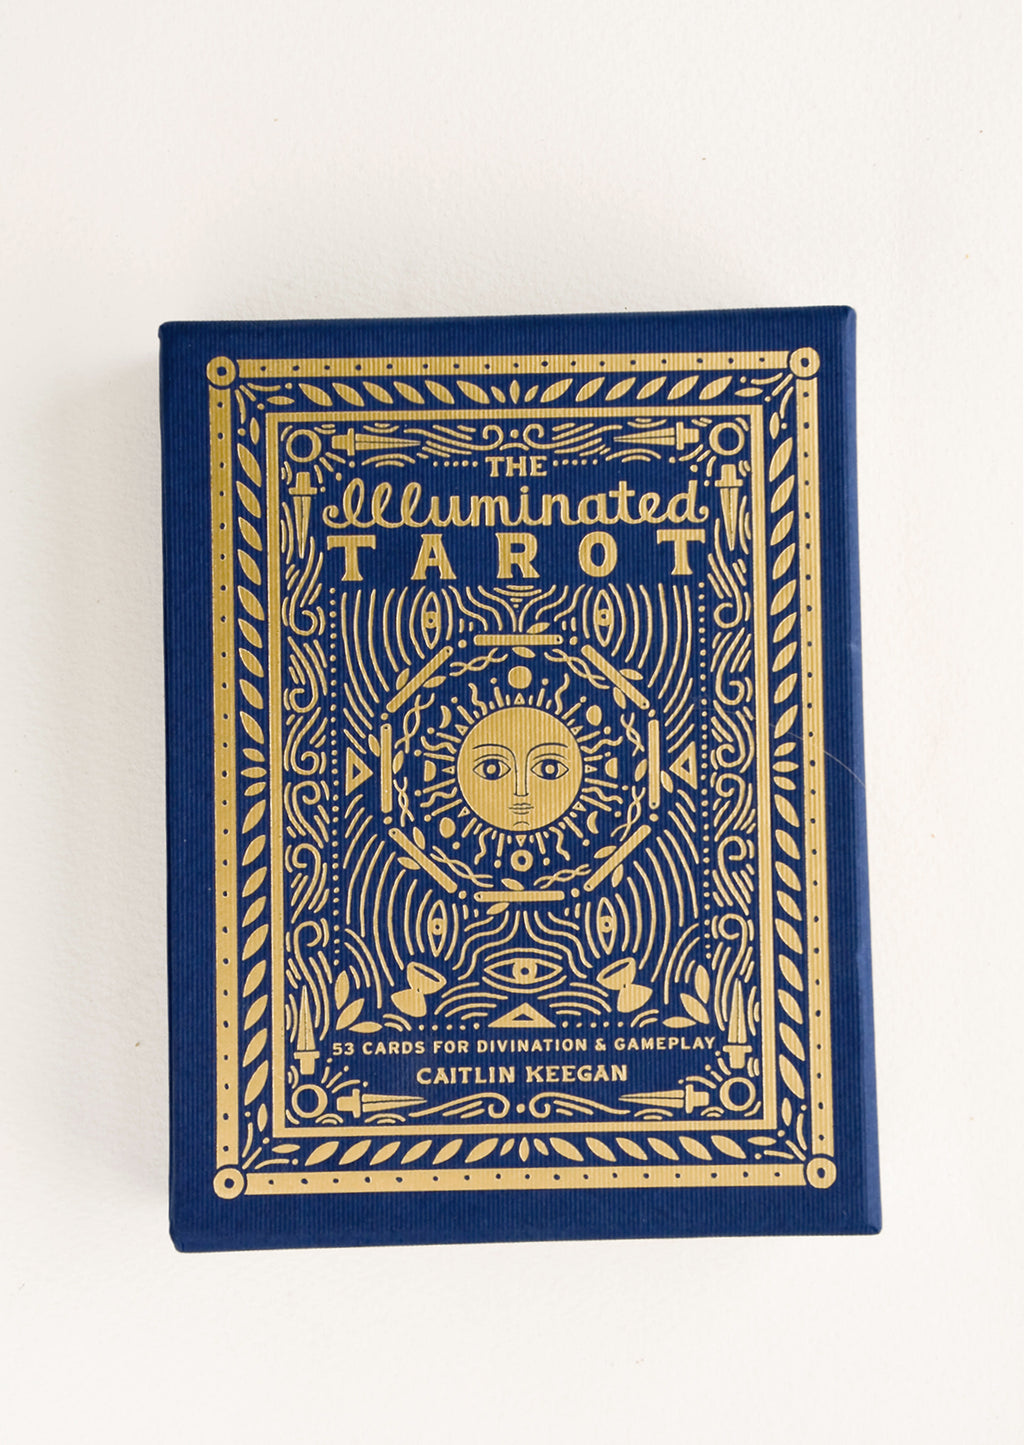 1: Decorative gift box of tarot cards in dark blue with metallic gold imagery